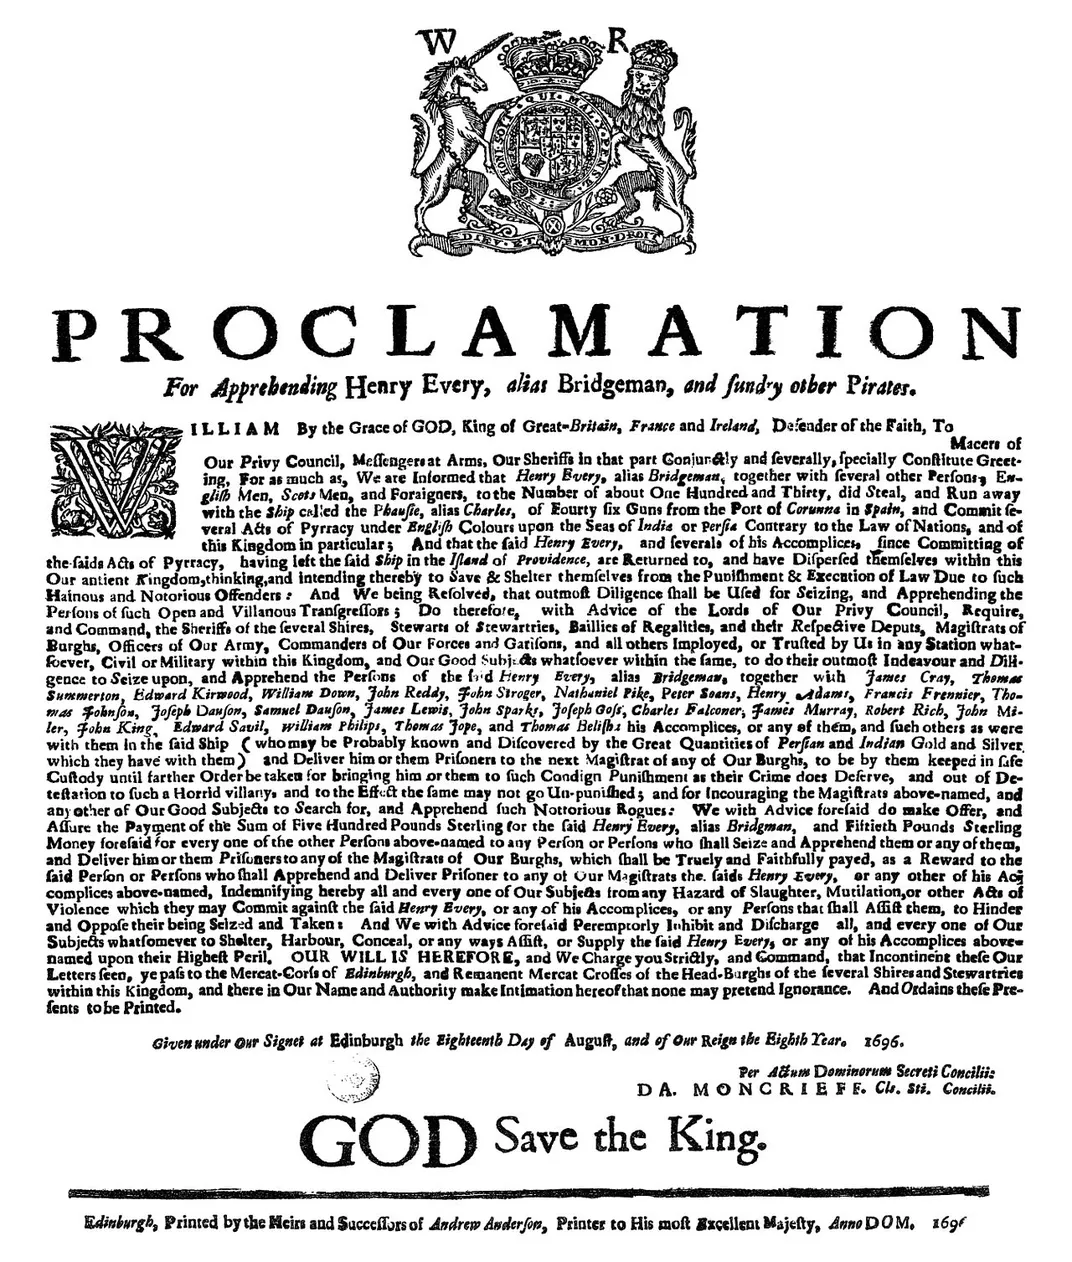 A proclamation for Avery's apprehension